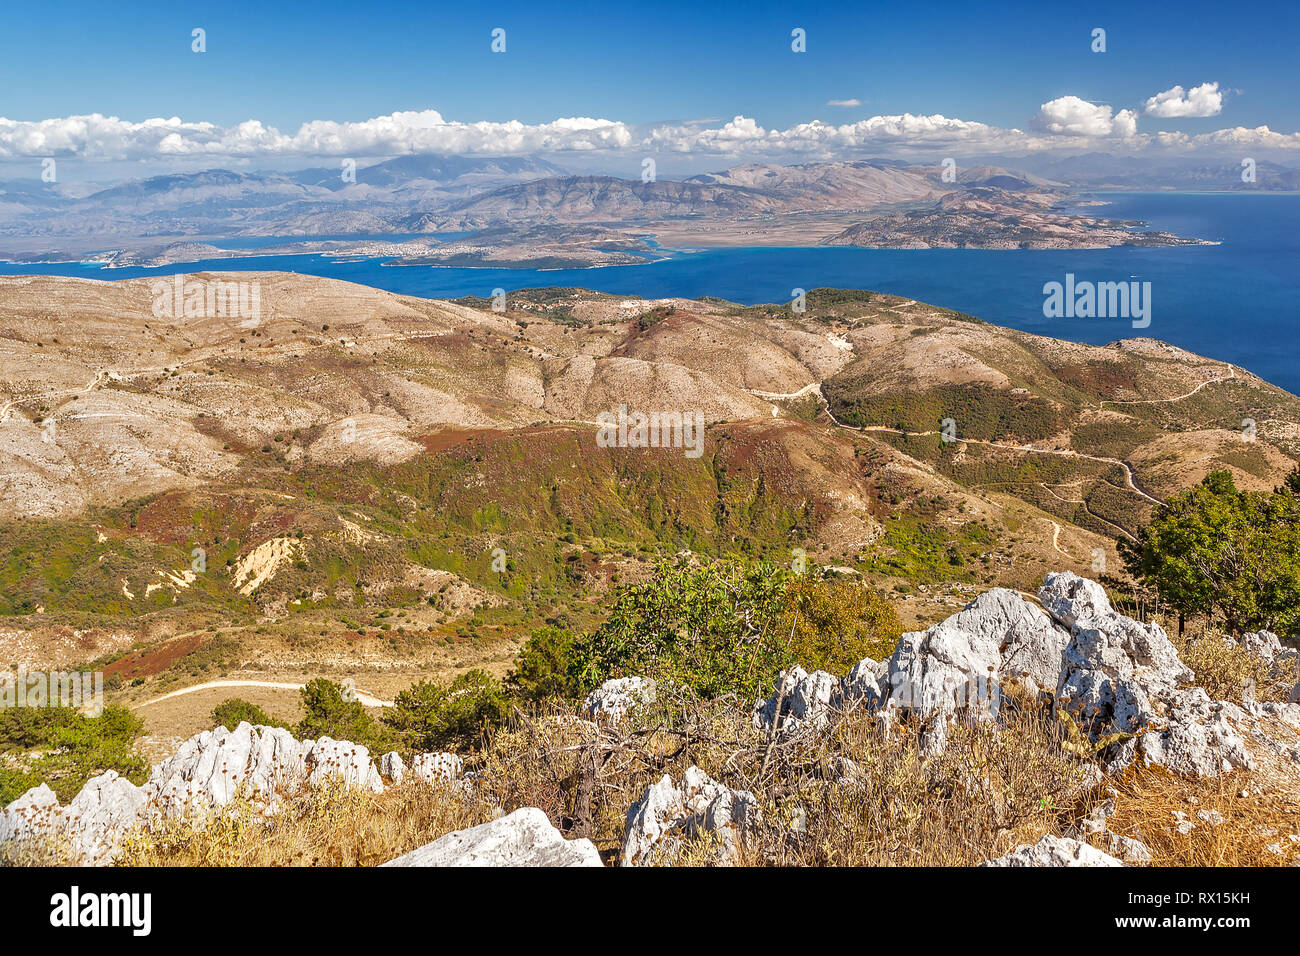 Aerial view over mountains to the rural road and Ionian sea, Pantokrator mountain foothill, Corfu, Greece Stock Photo